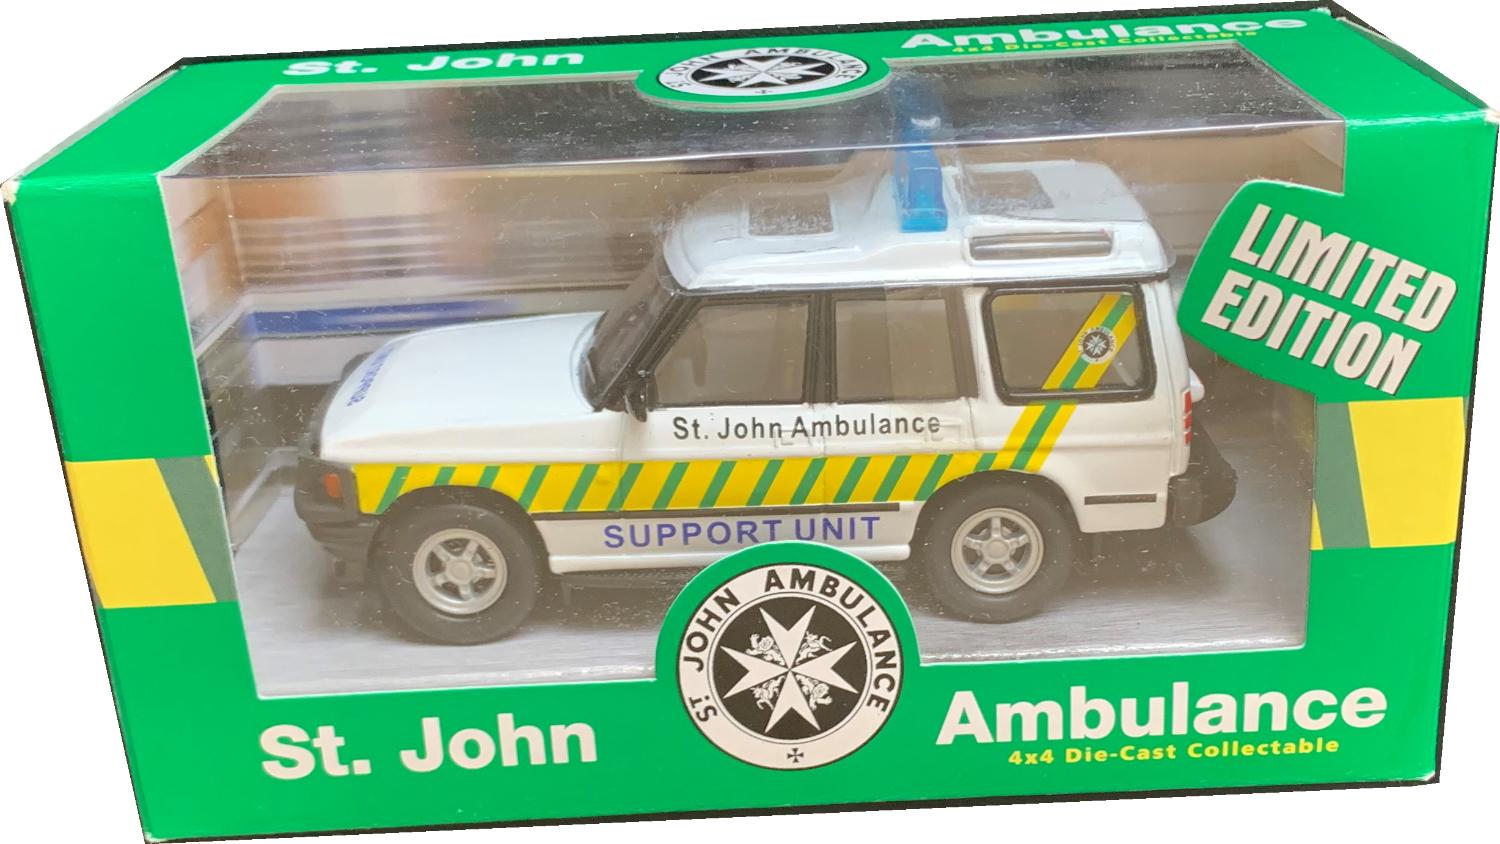 St Johns Ambulance, Land Rover Discovery, support unit  1:36 scale model from Richmond Toys, limited edition